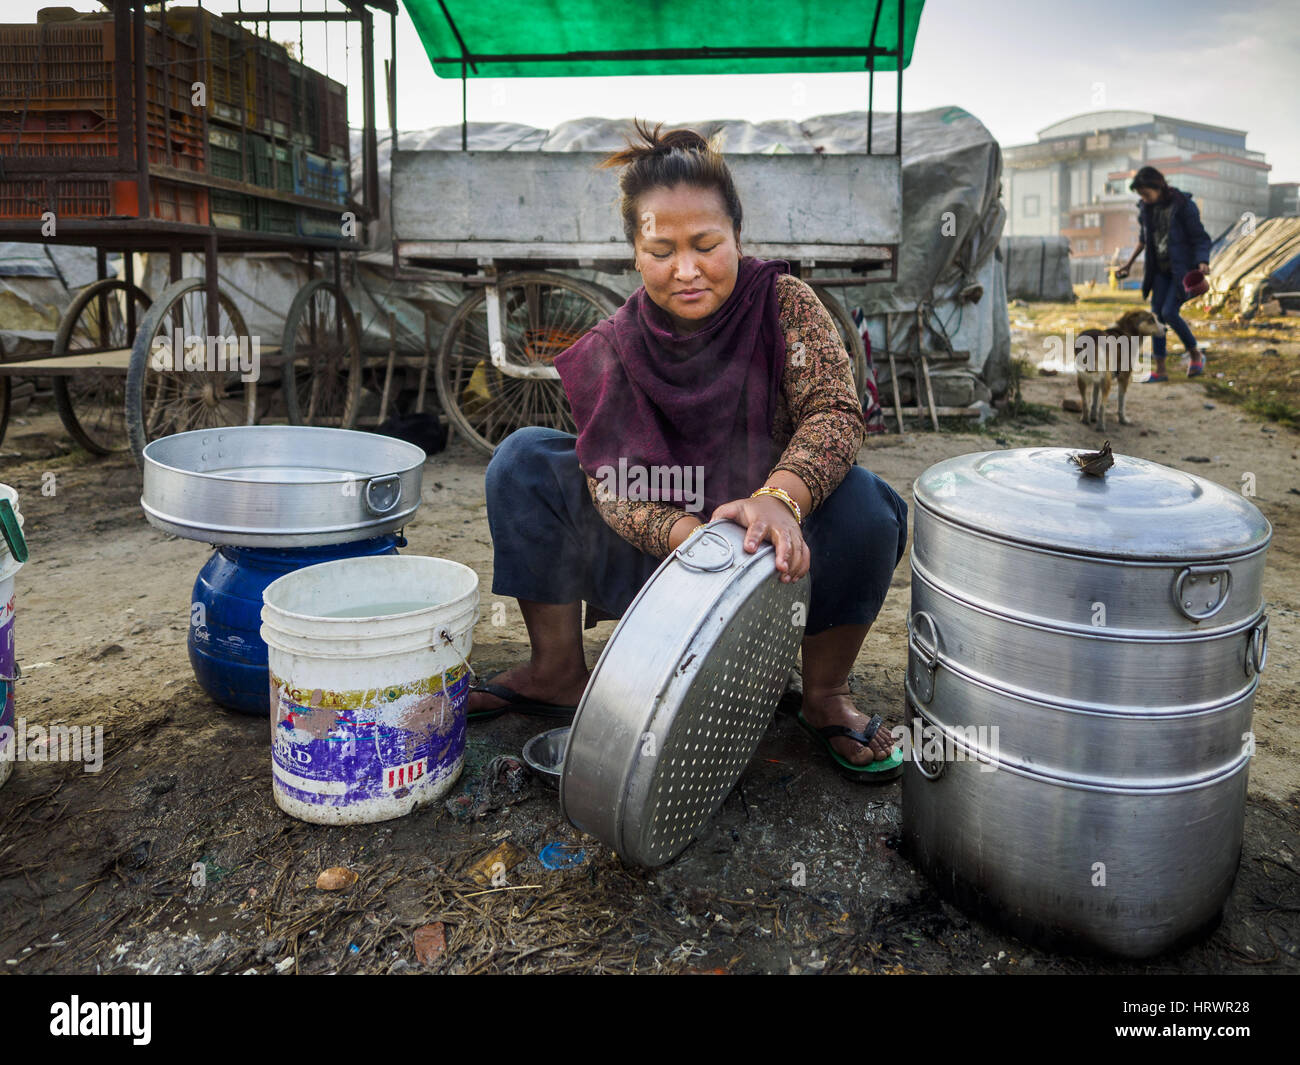 Kathmandu, Central Development Region, Nepal. 4th Mar, 2017. A woman from rural Nepal cleans the pans she uses to make steamed momos (a type of Nepalese dumpling) in an IDP camp in the center of Kathmandu. She lives in the camp with her husband and son and sells momos on the streets of Kathmandu. The camp opened days after the April 2015 earthquake devastated Nepal, killing almost 9,000 people. At its peak, about 1,800 families lived in the camp. The camp is still open nearly two years after the earthquake, about 400 families currently live in the camp. Camp residents say the Kathmandu munic Stock Photo